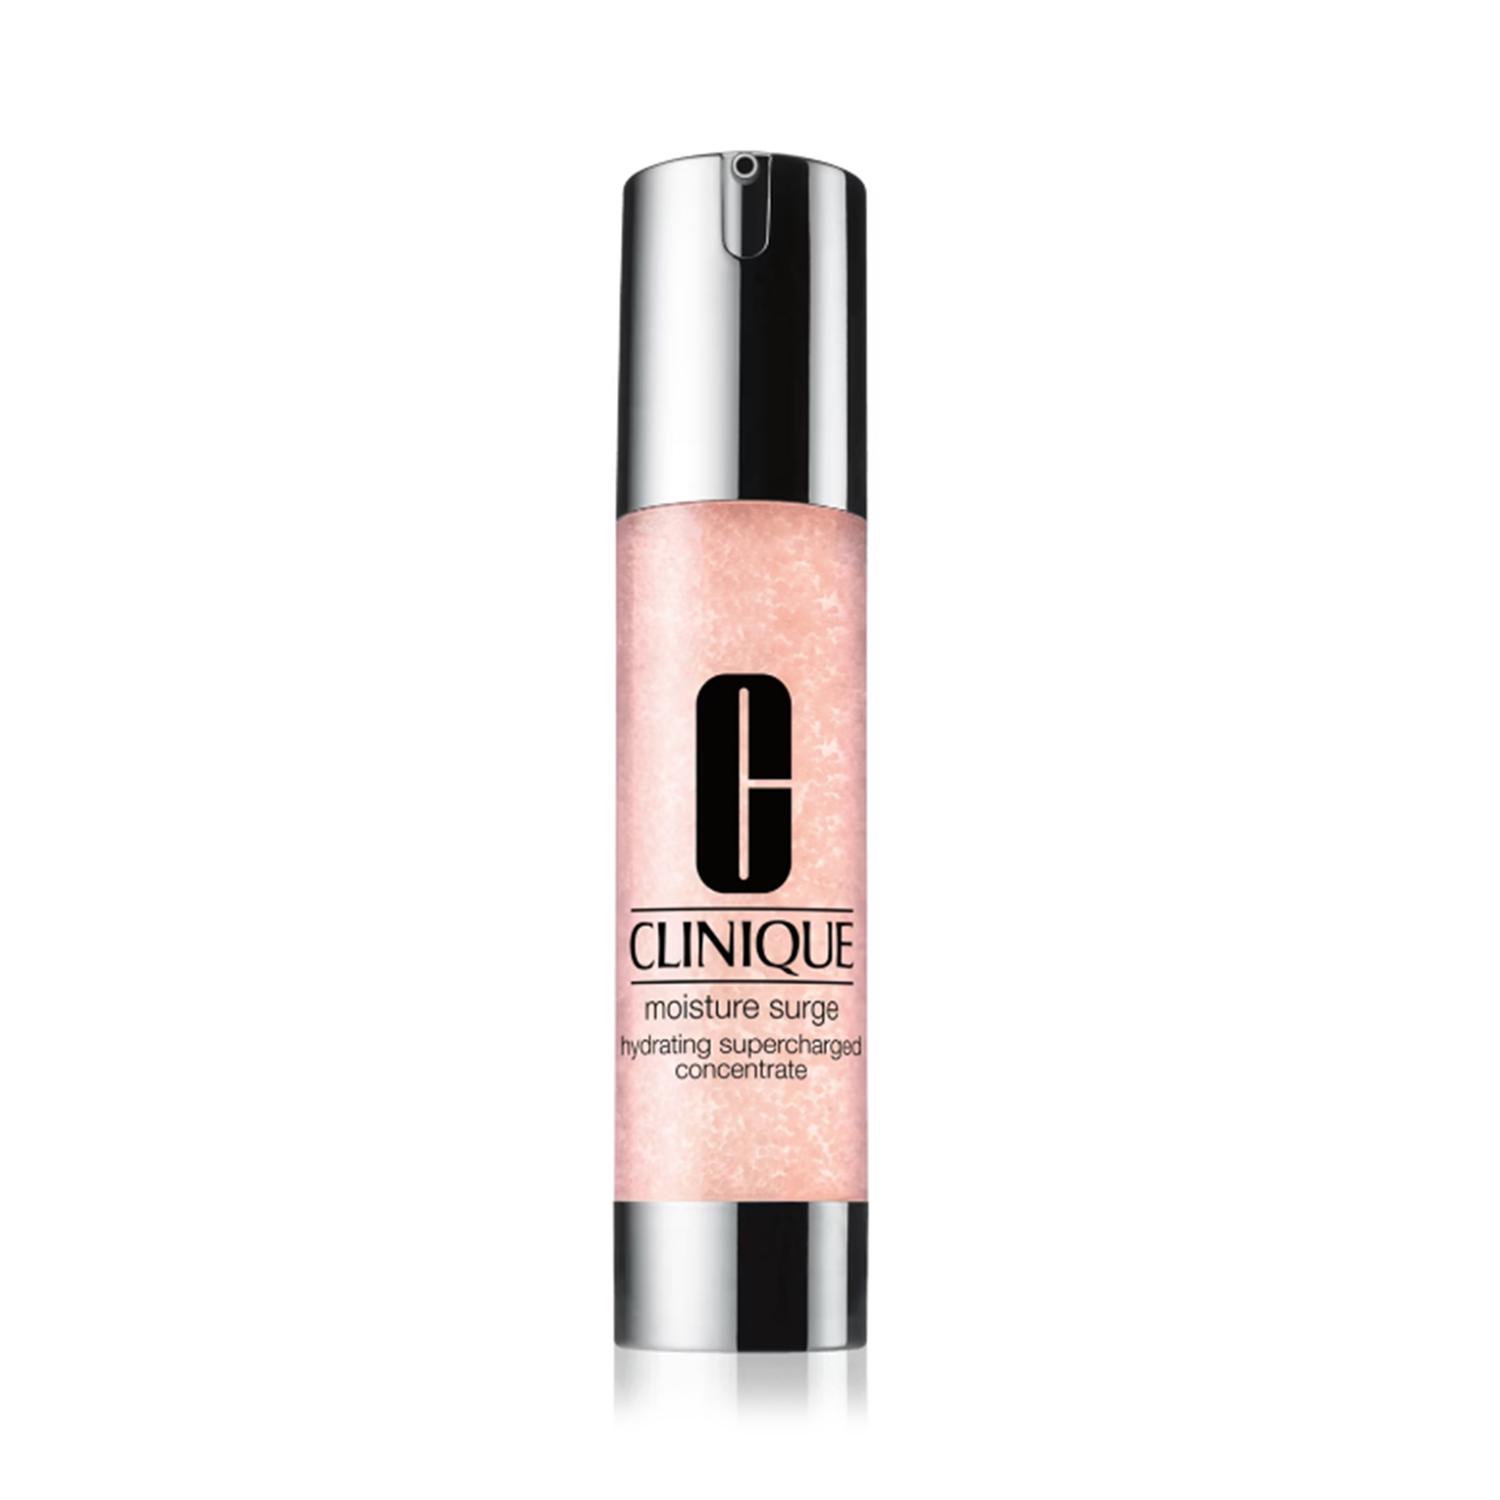 CLINIQUE Moisture Surge Hydrating Supercharged Concentrate (48ml)